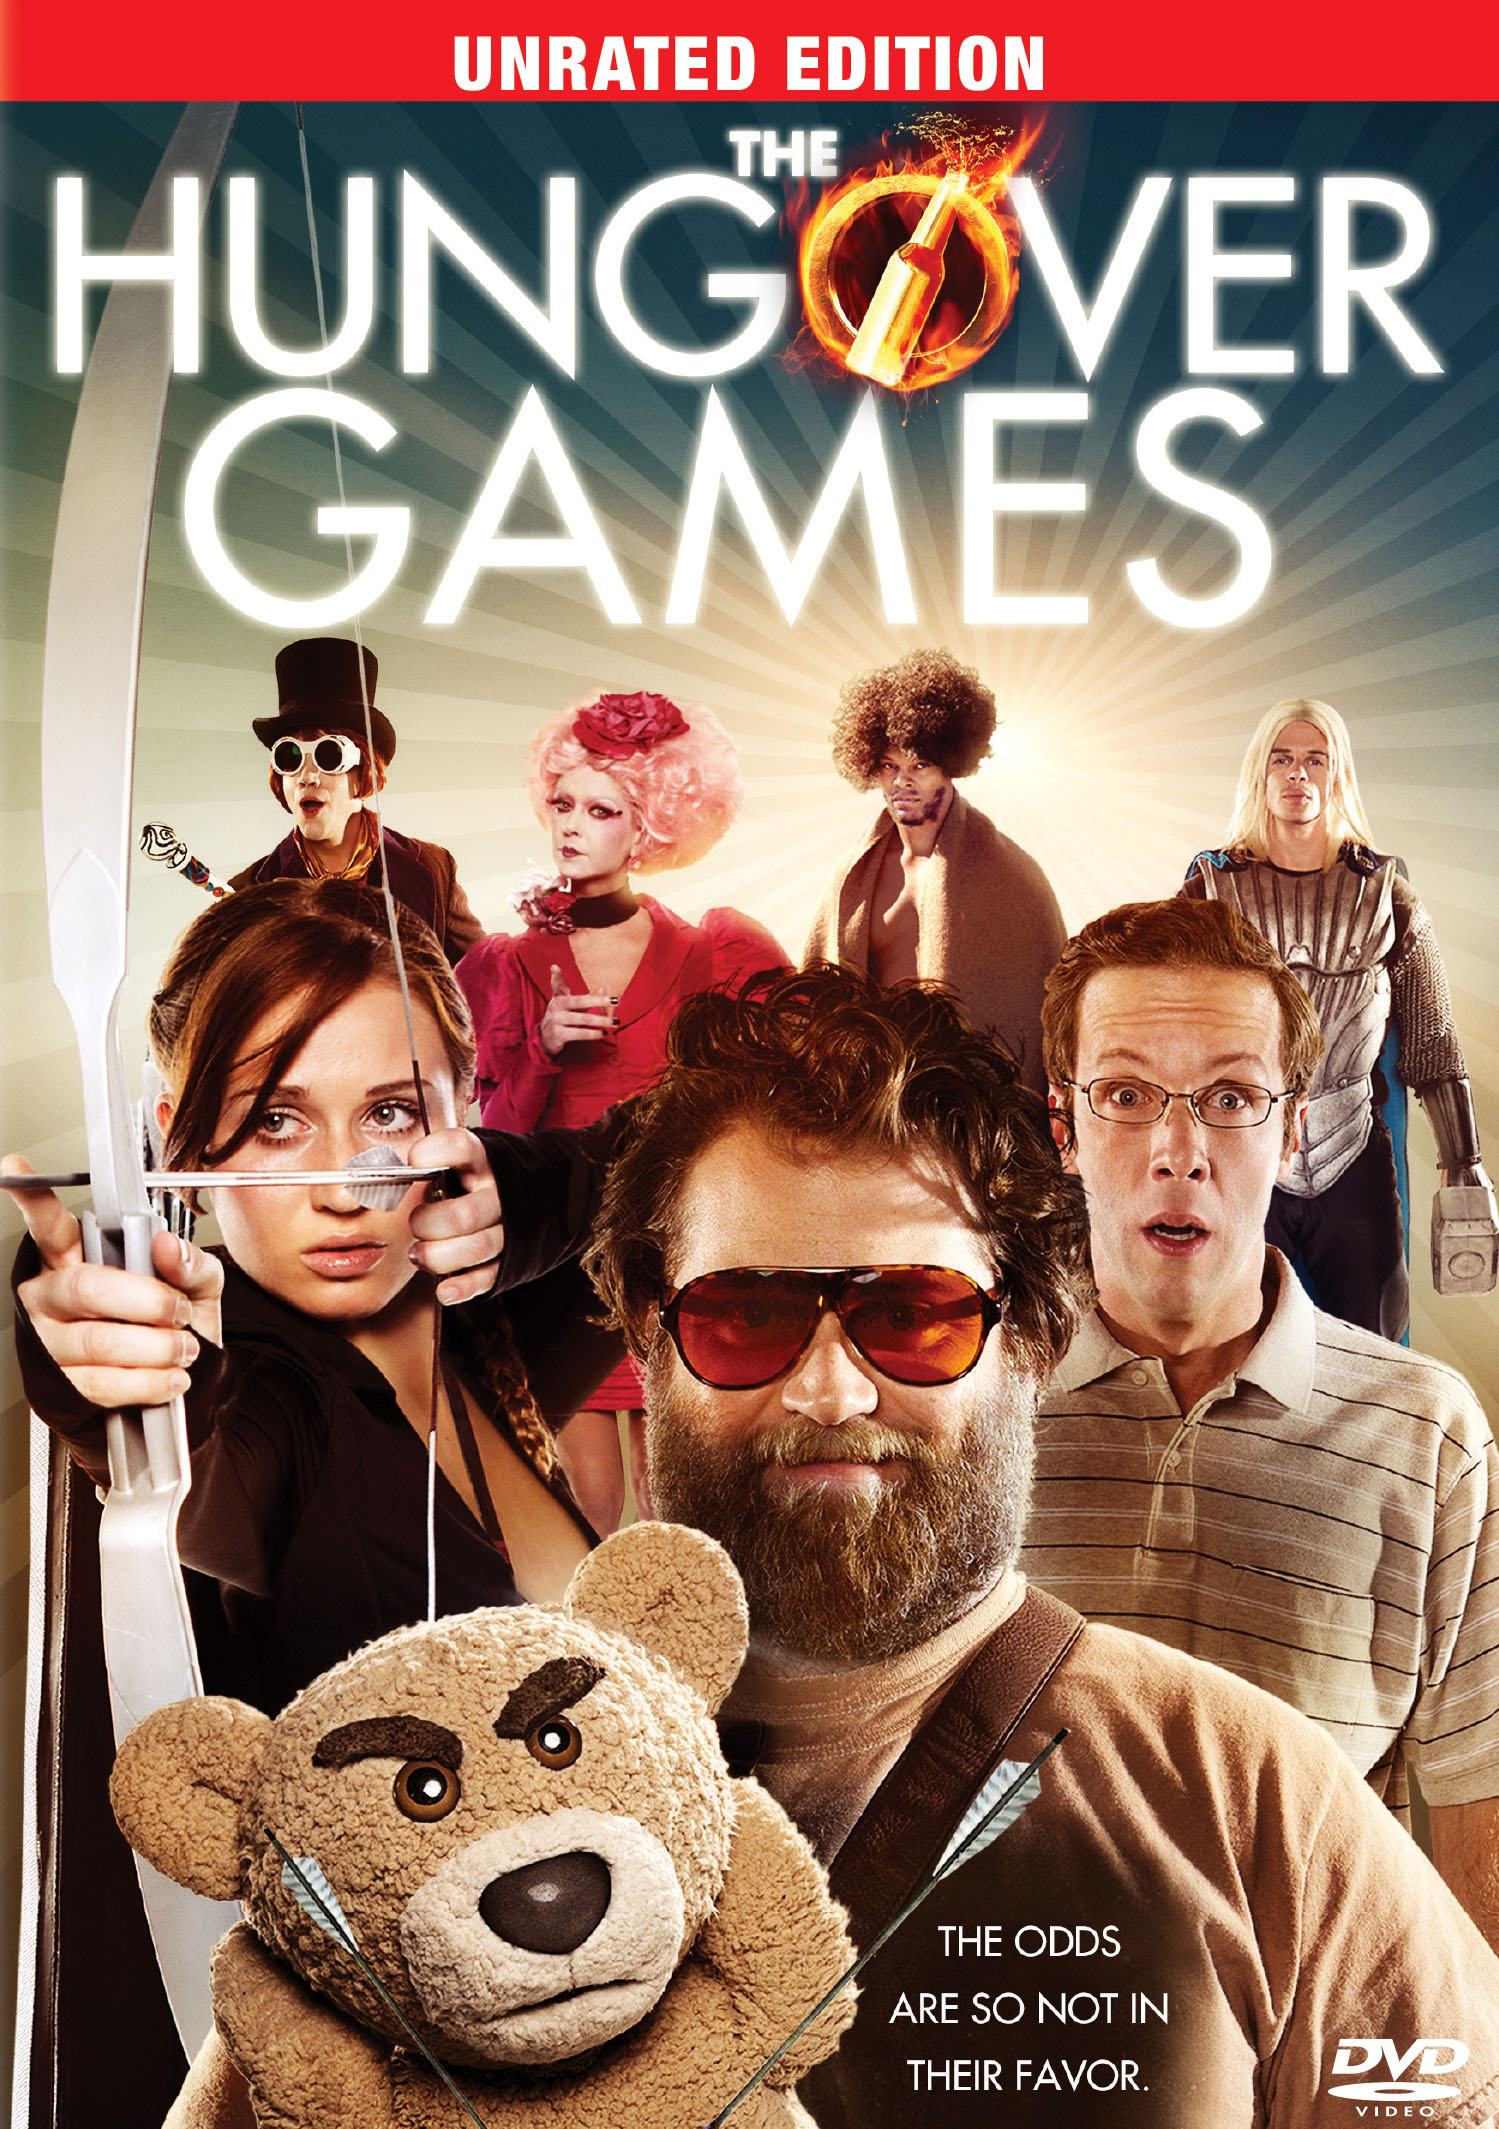 The hungover games budget